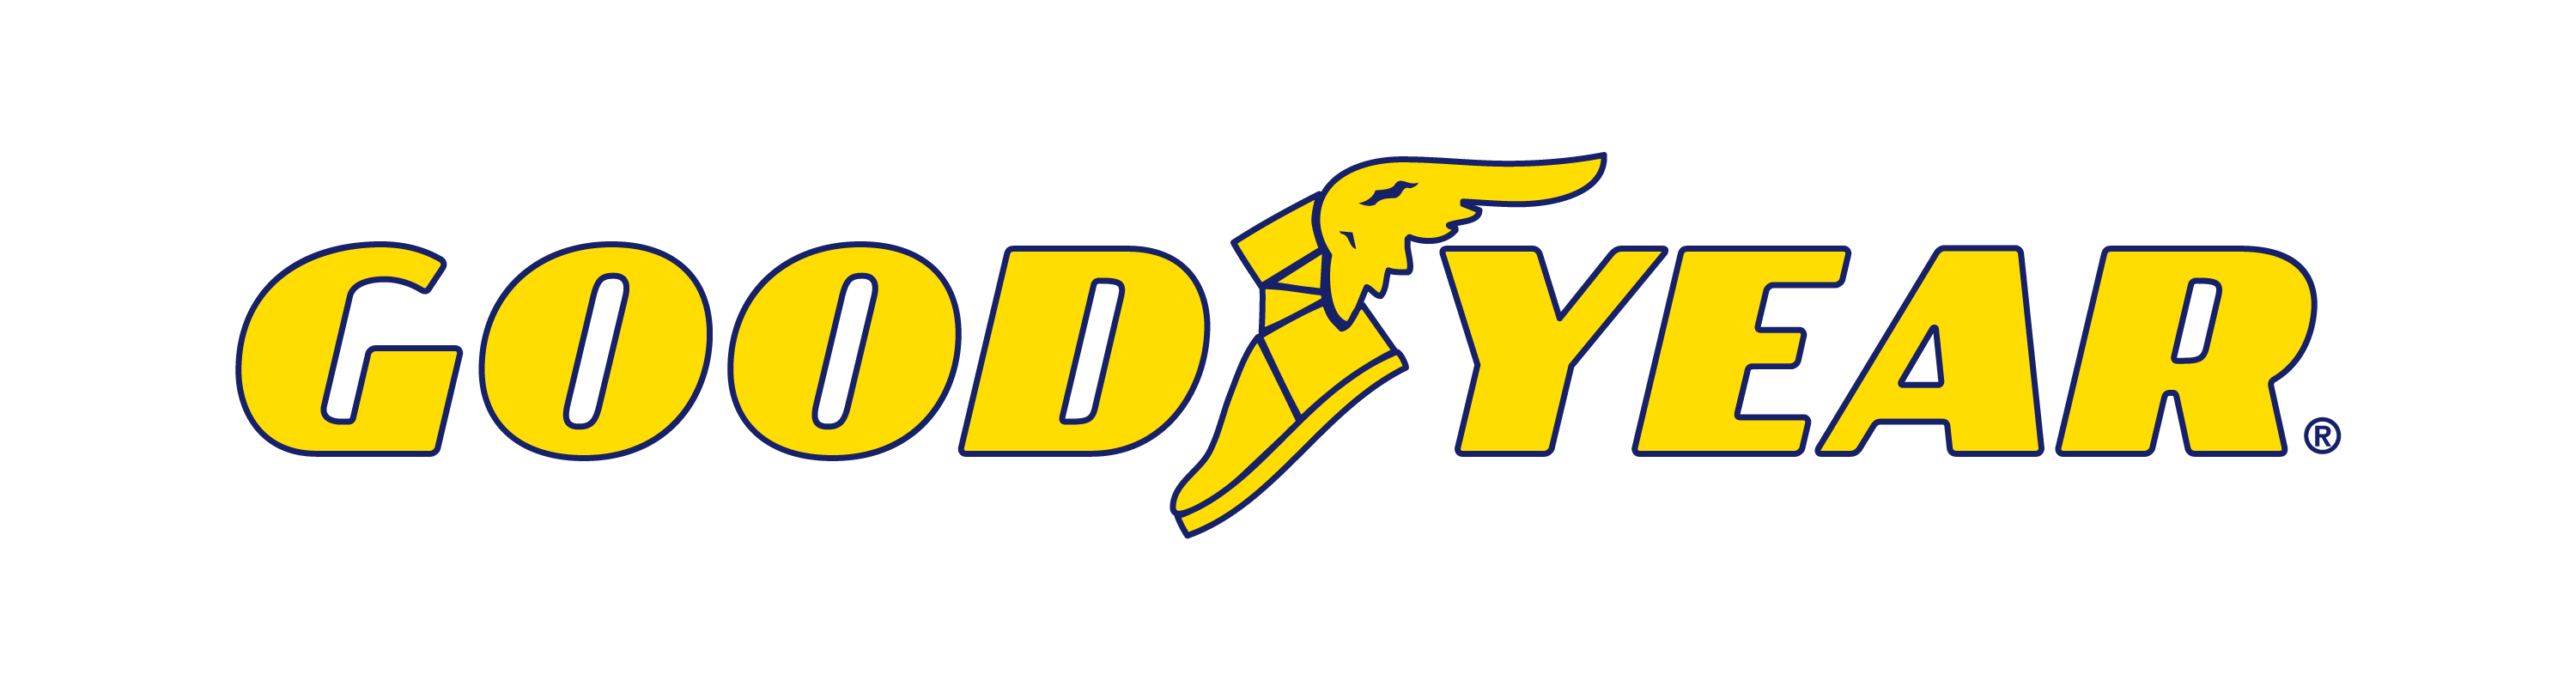 Goodyear Tires rebates and promotions 